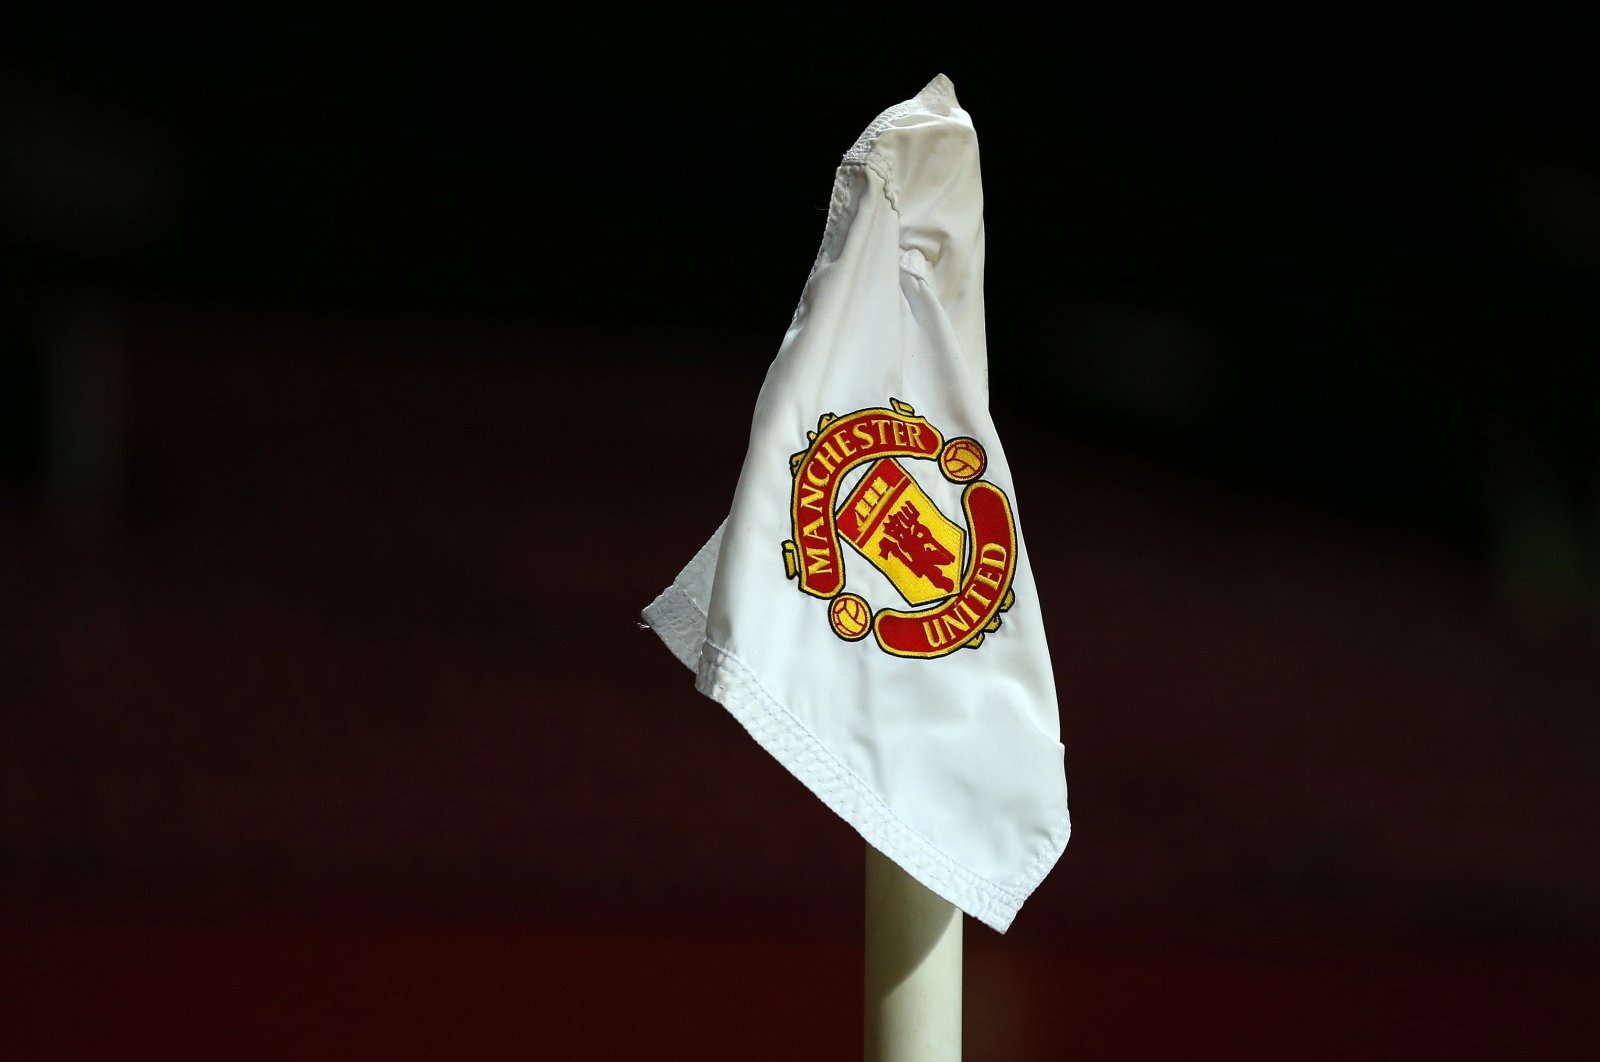 The Manchester United club logo is seen on a corner flag on the Old Trafford pitch ahead of the FA Cup fourth-round replay match against Cambridge United at Old Trafford, Manchester, northern England, Feb. 3, 2015. (Reuters Photo)